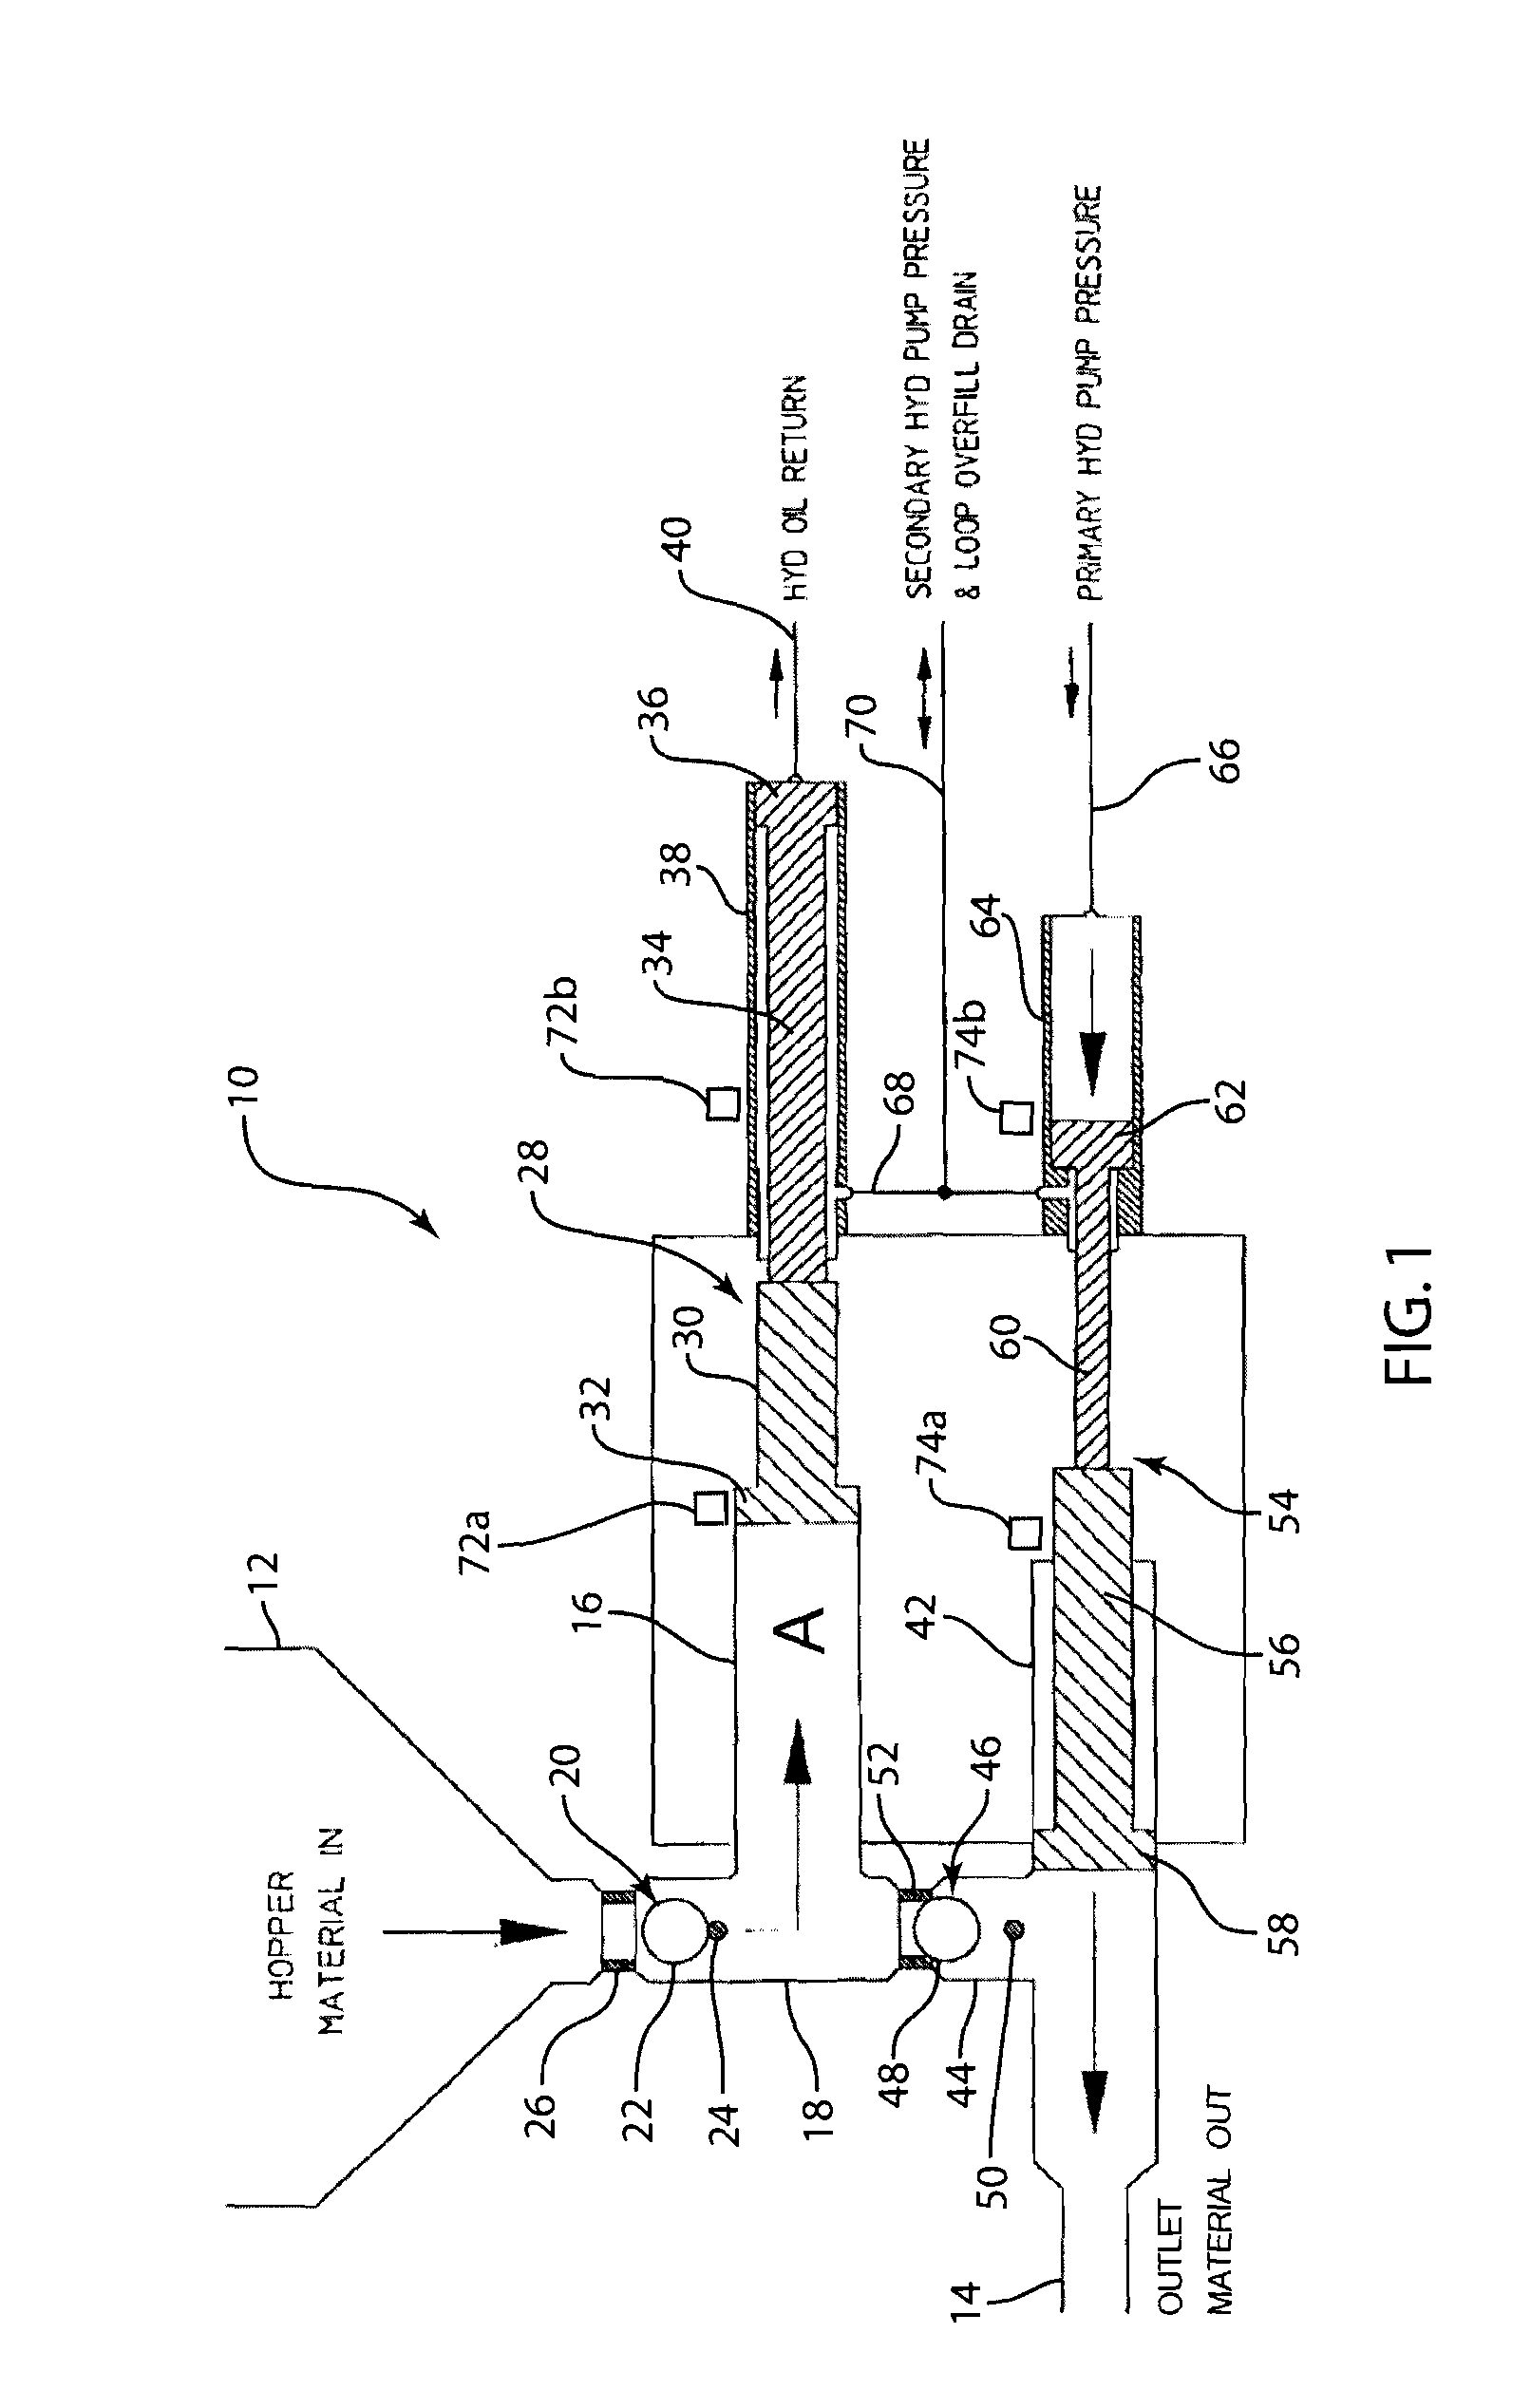 Unequal length alternating hydraulic cylinder drive system for continuous material output flow with equal material output pressure